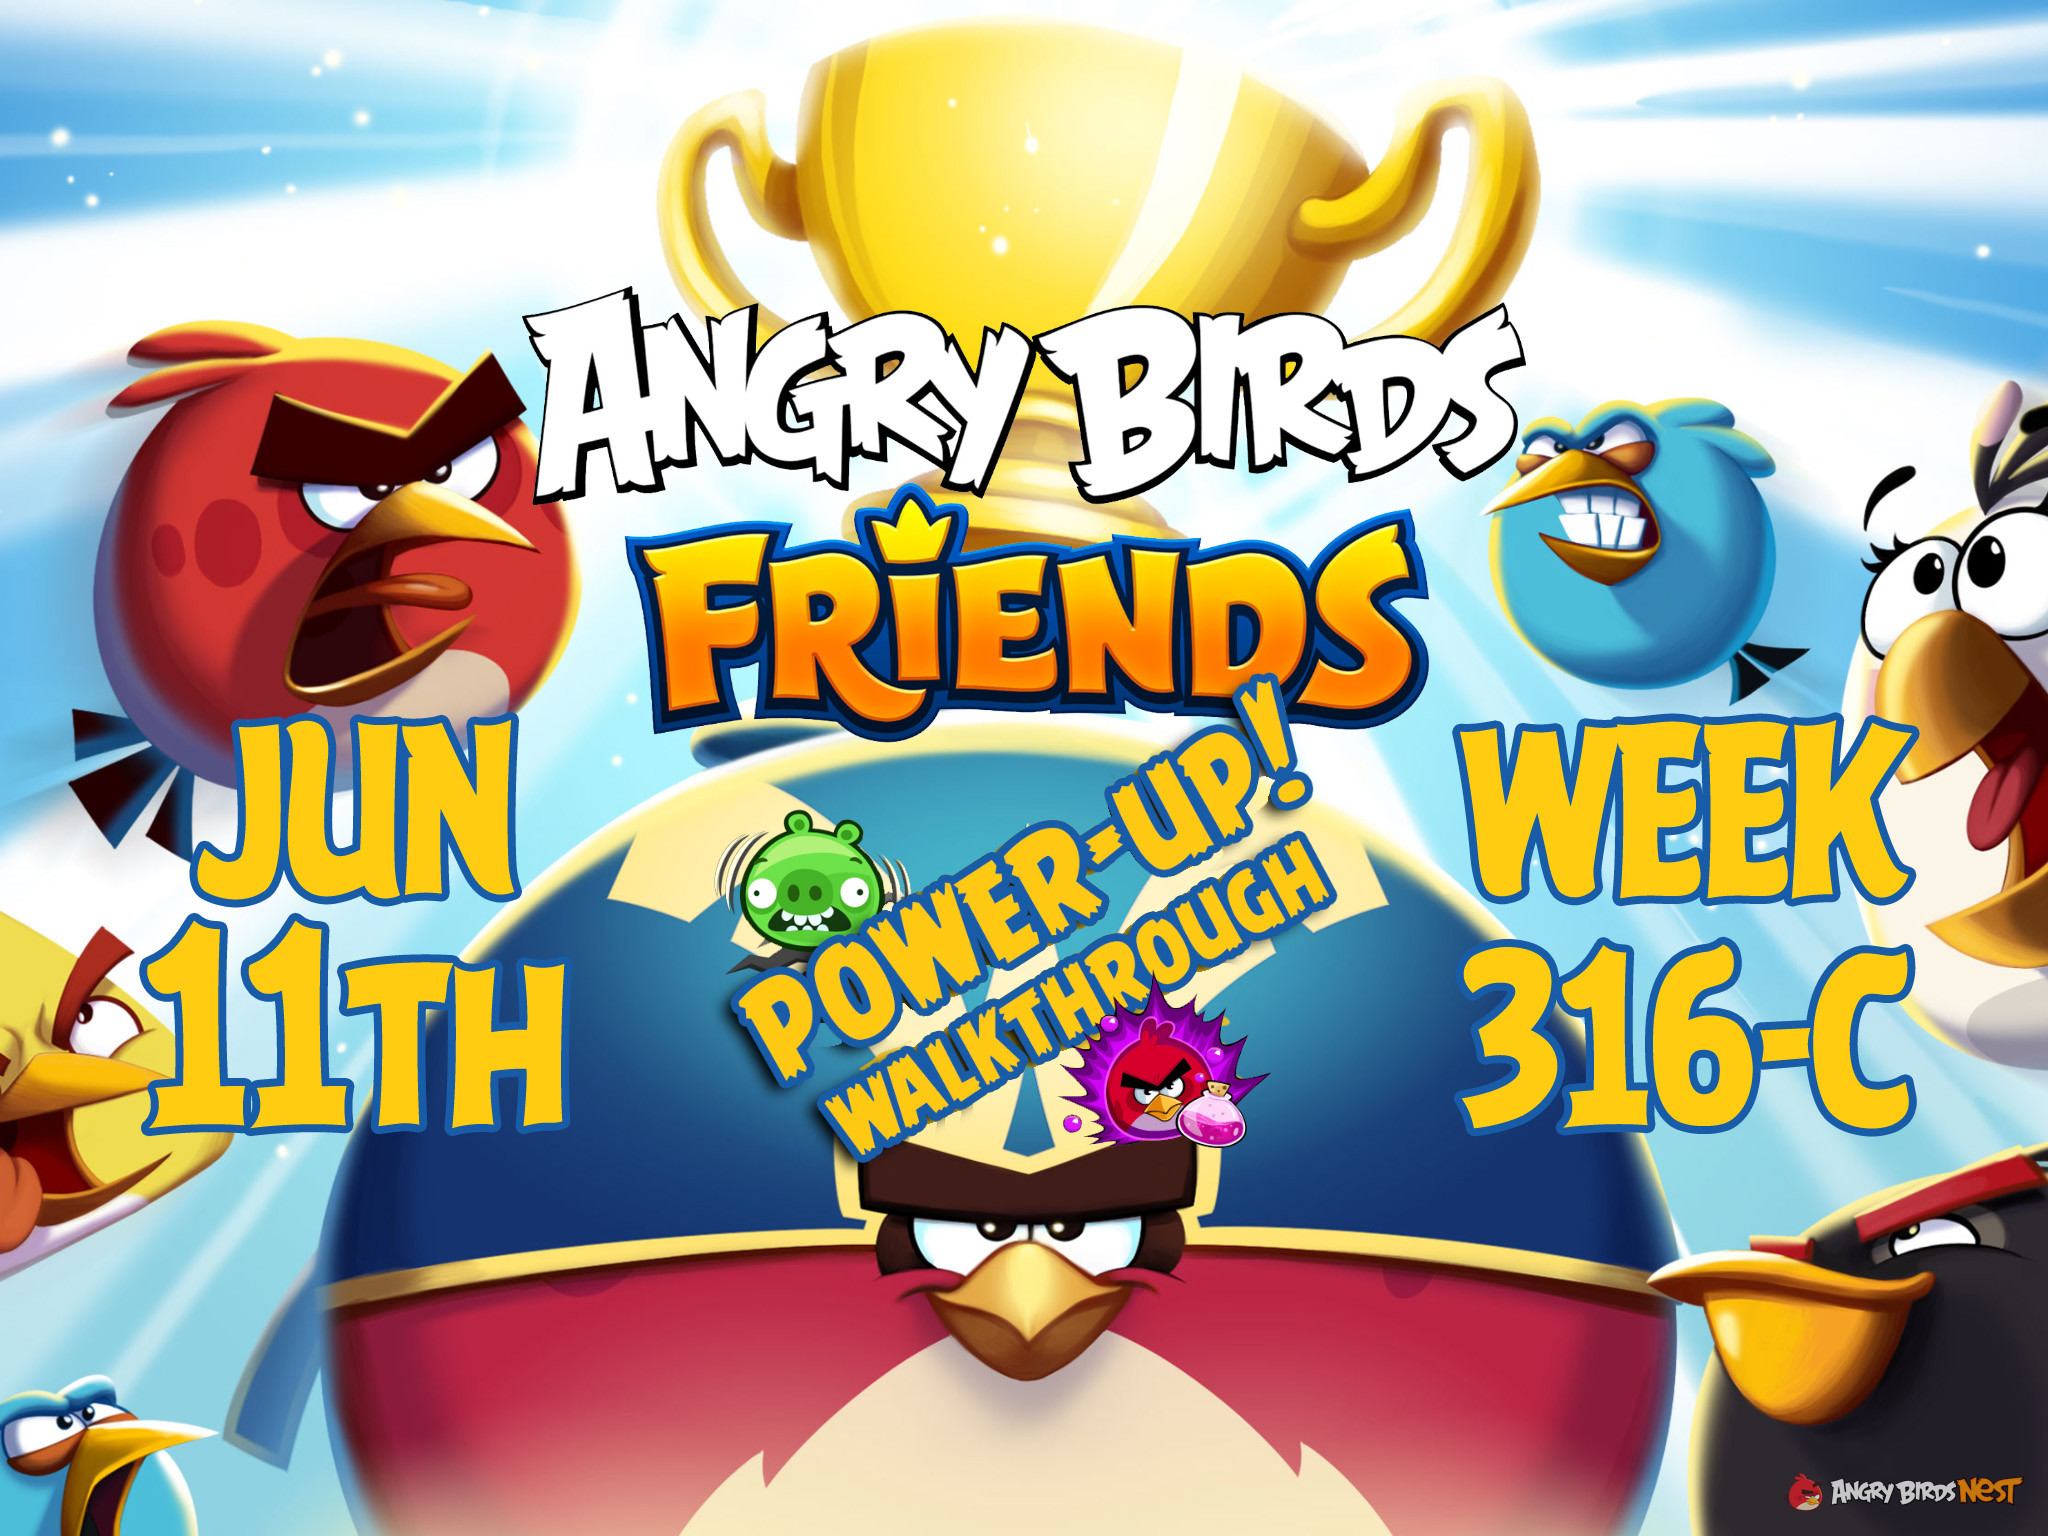 Angry-Birds-Friends-Tournament-Week-316-C-Feature-Image-PU